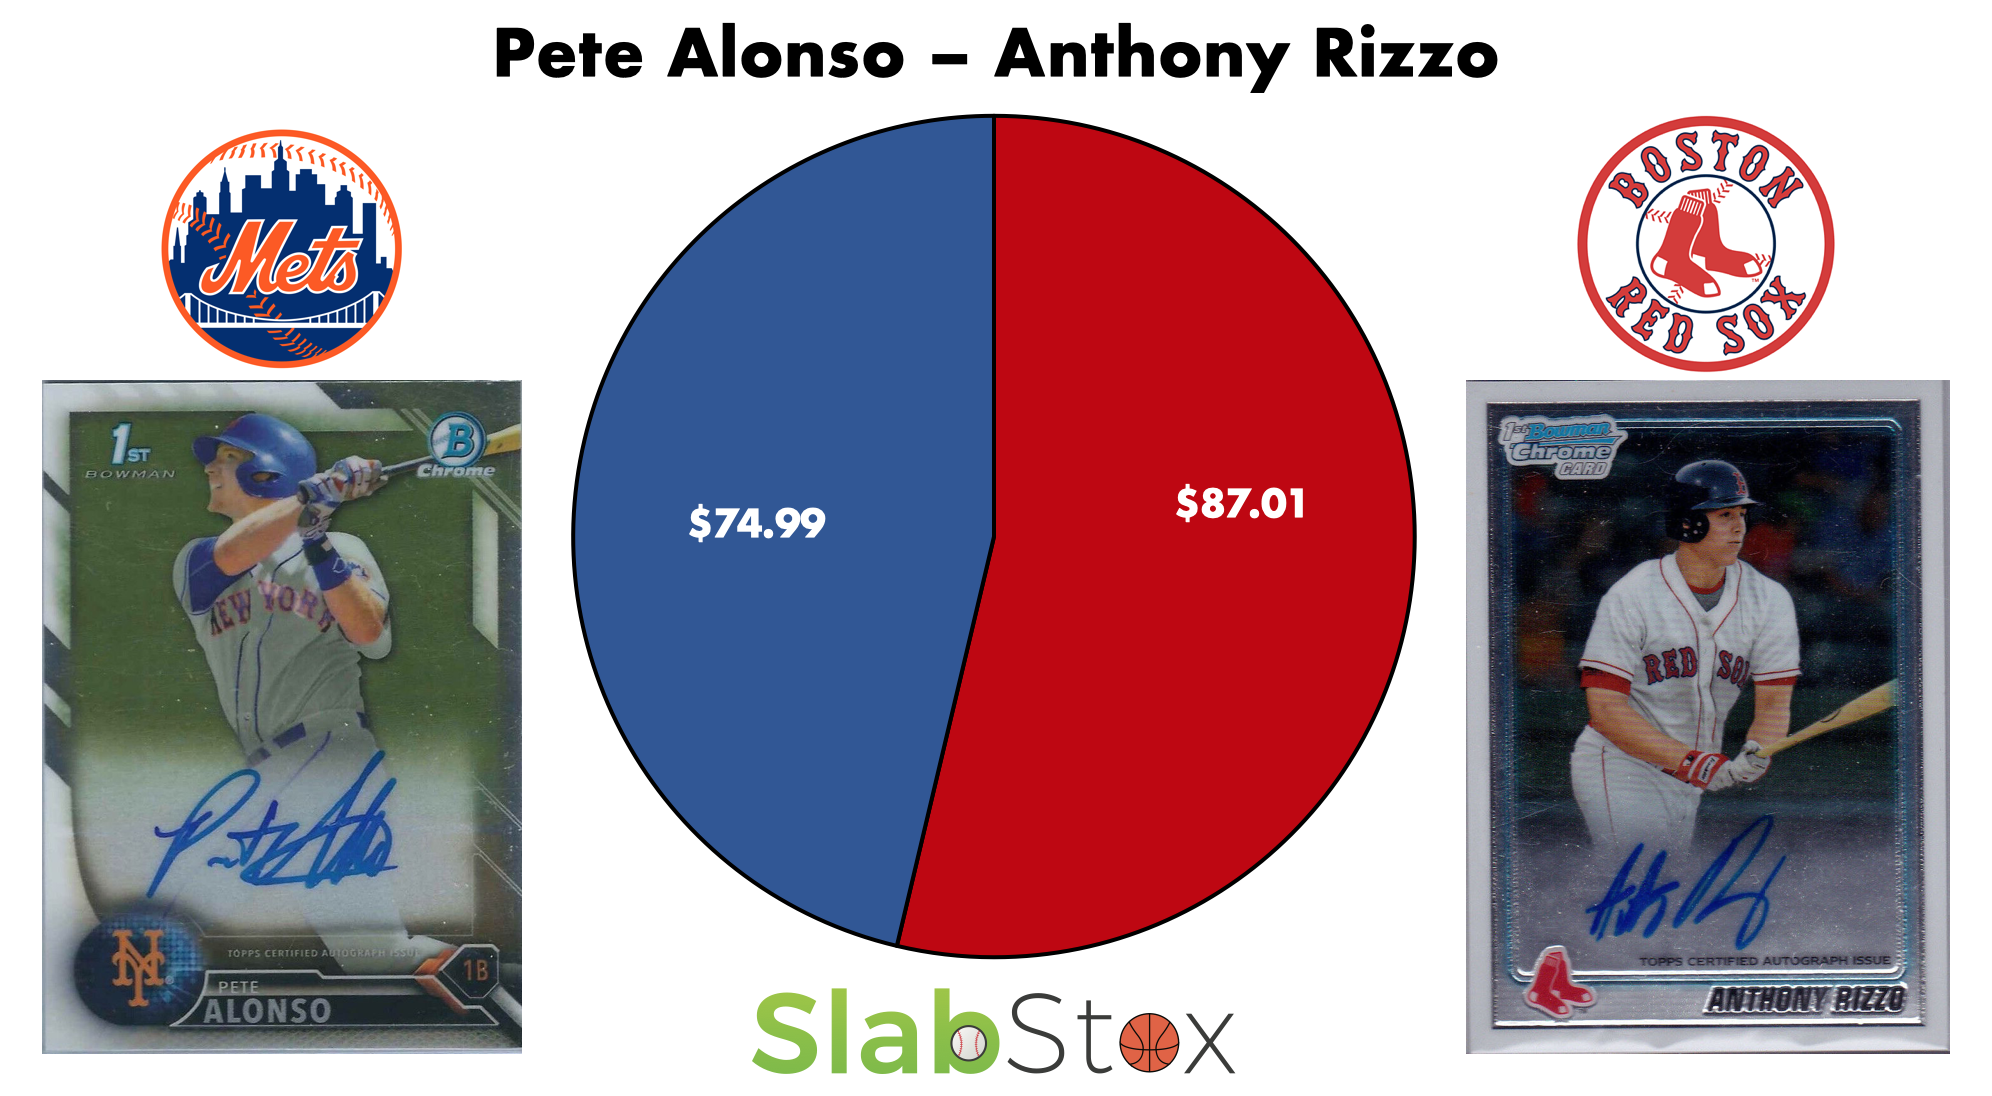 SlabStox infographic of Pete Alonso vs. Anthony Rizzo sports trading cards